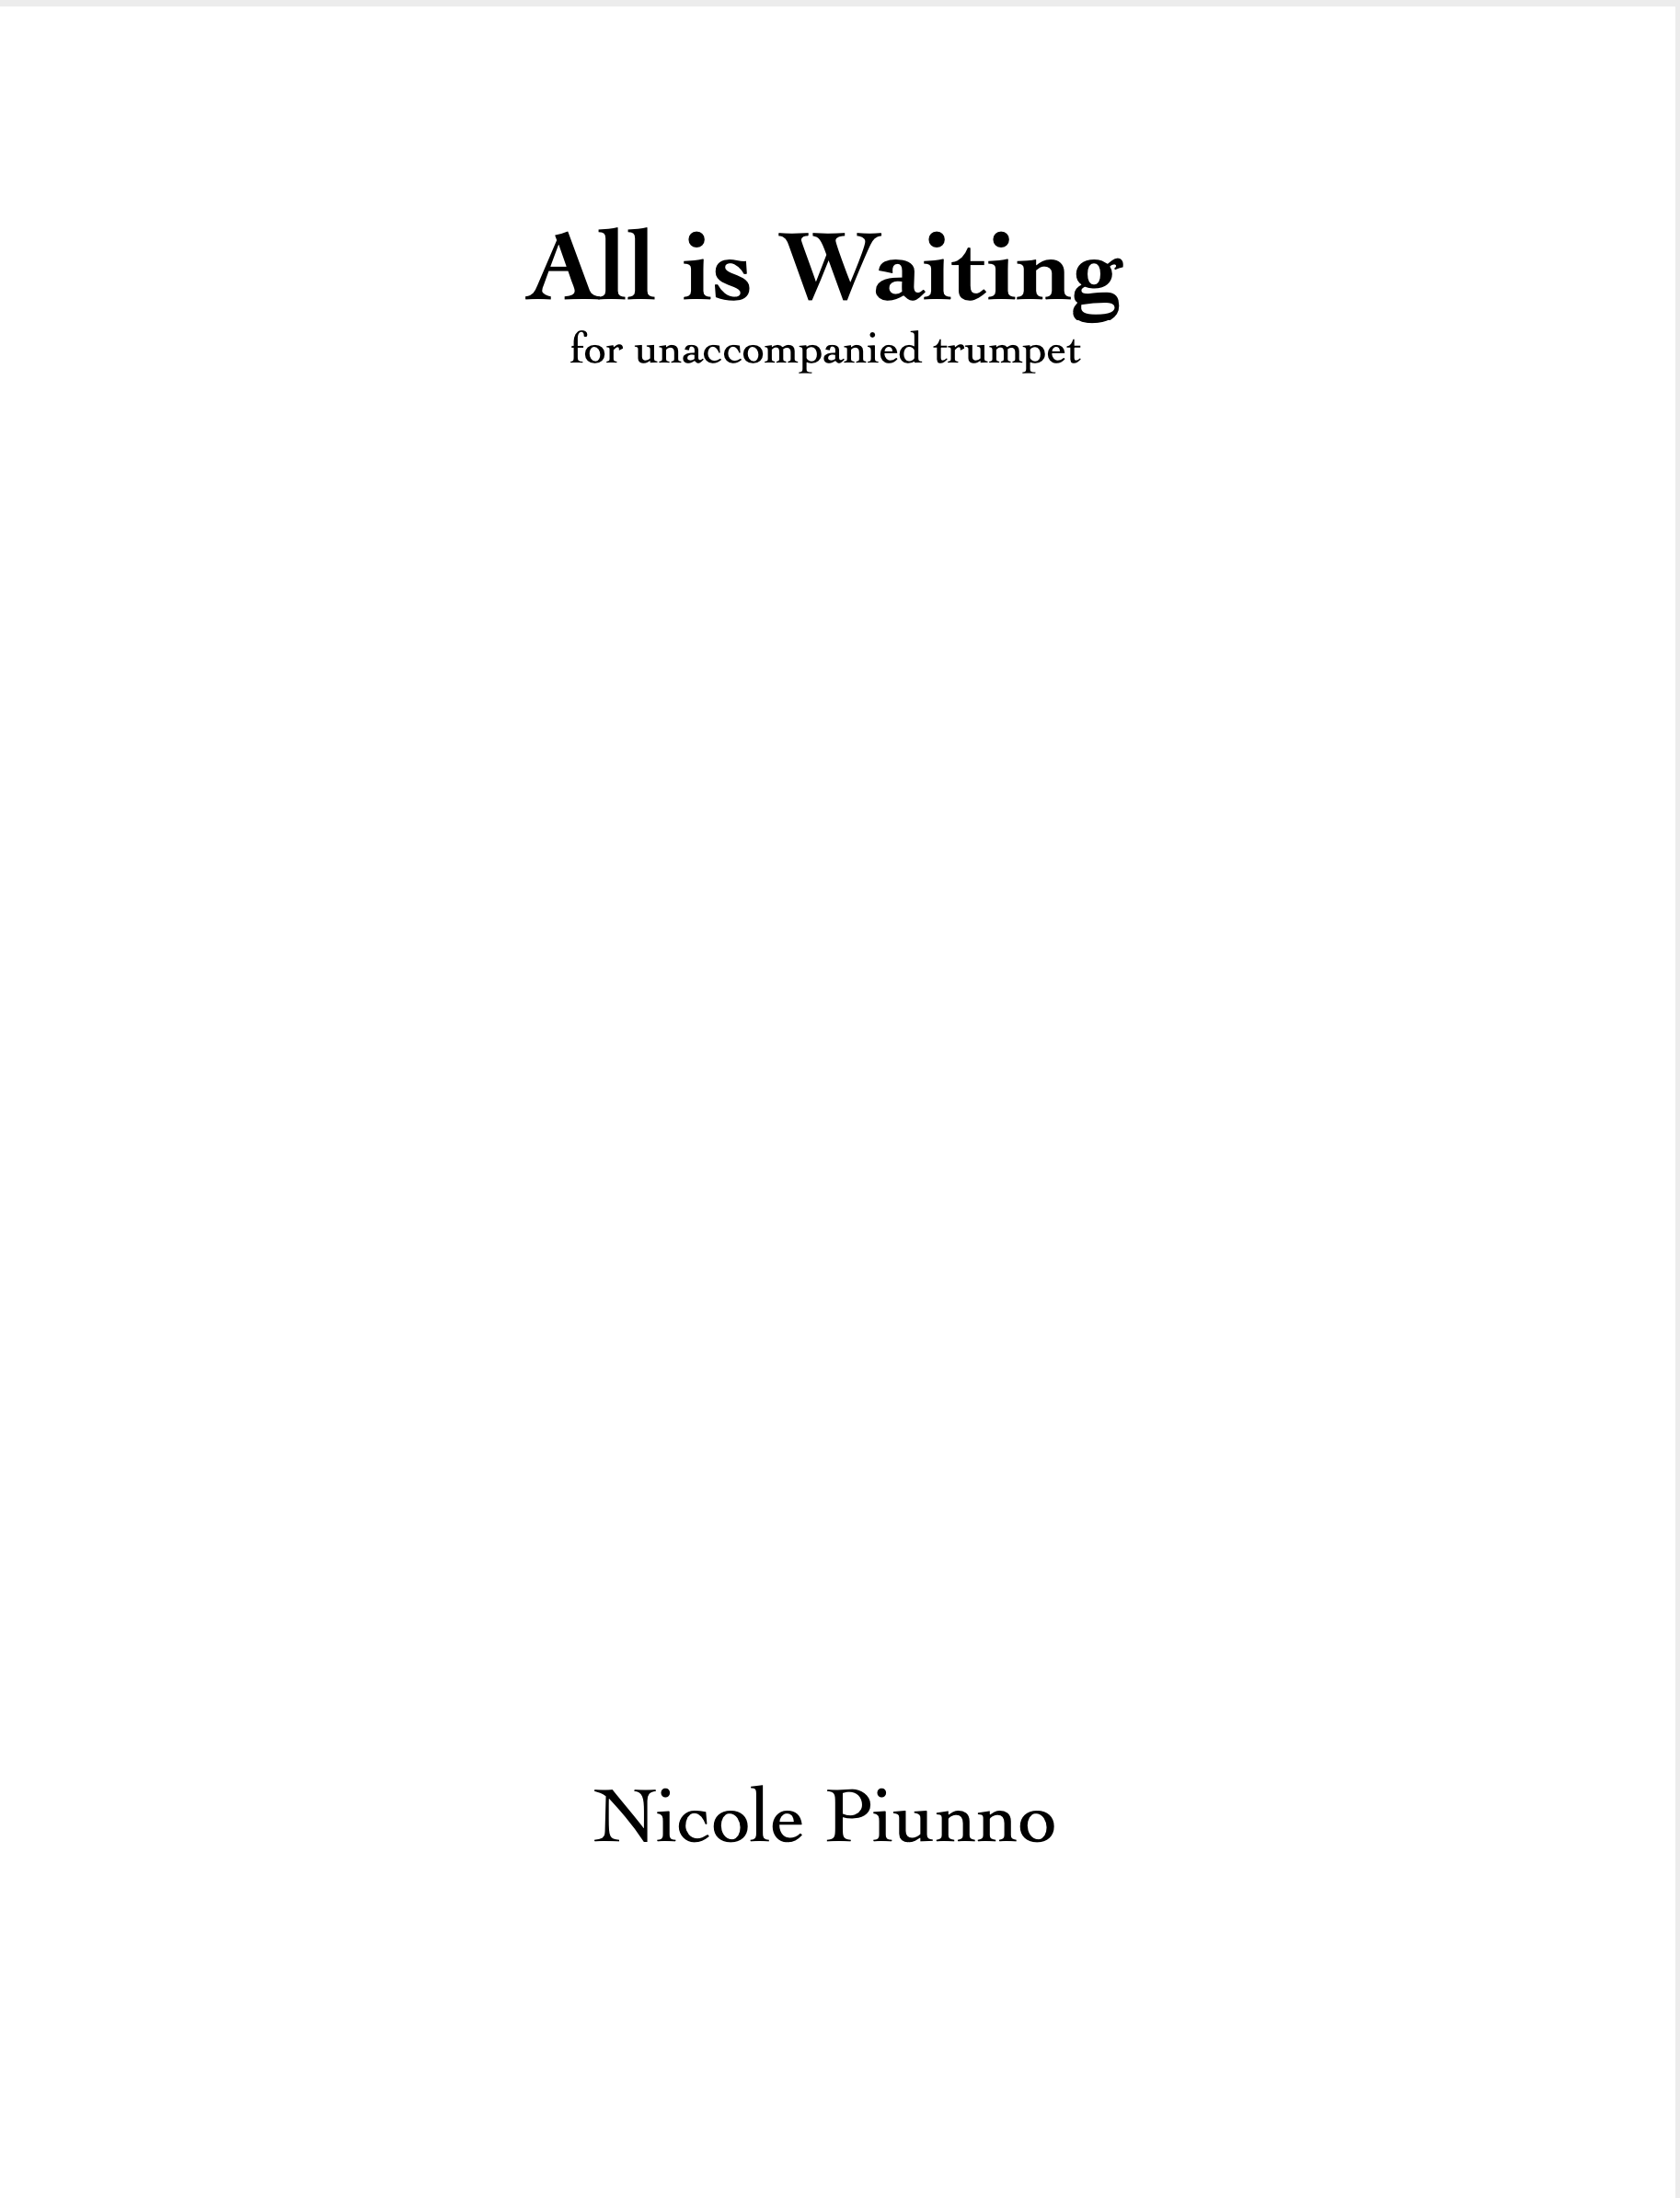 All Is Waiting by Nicole Piunno